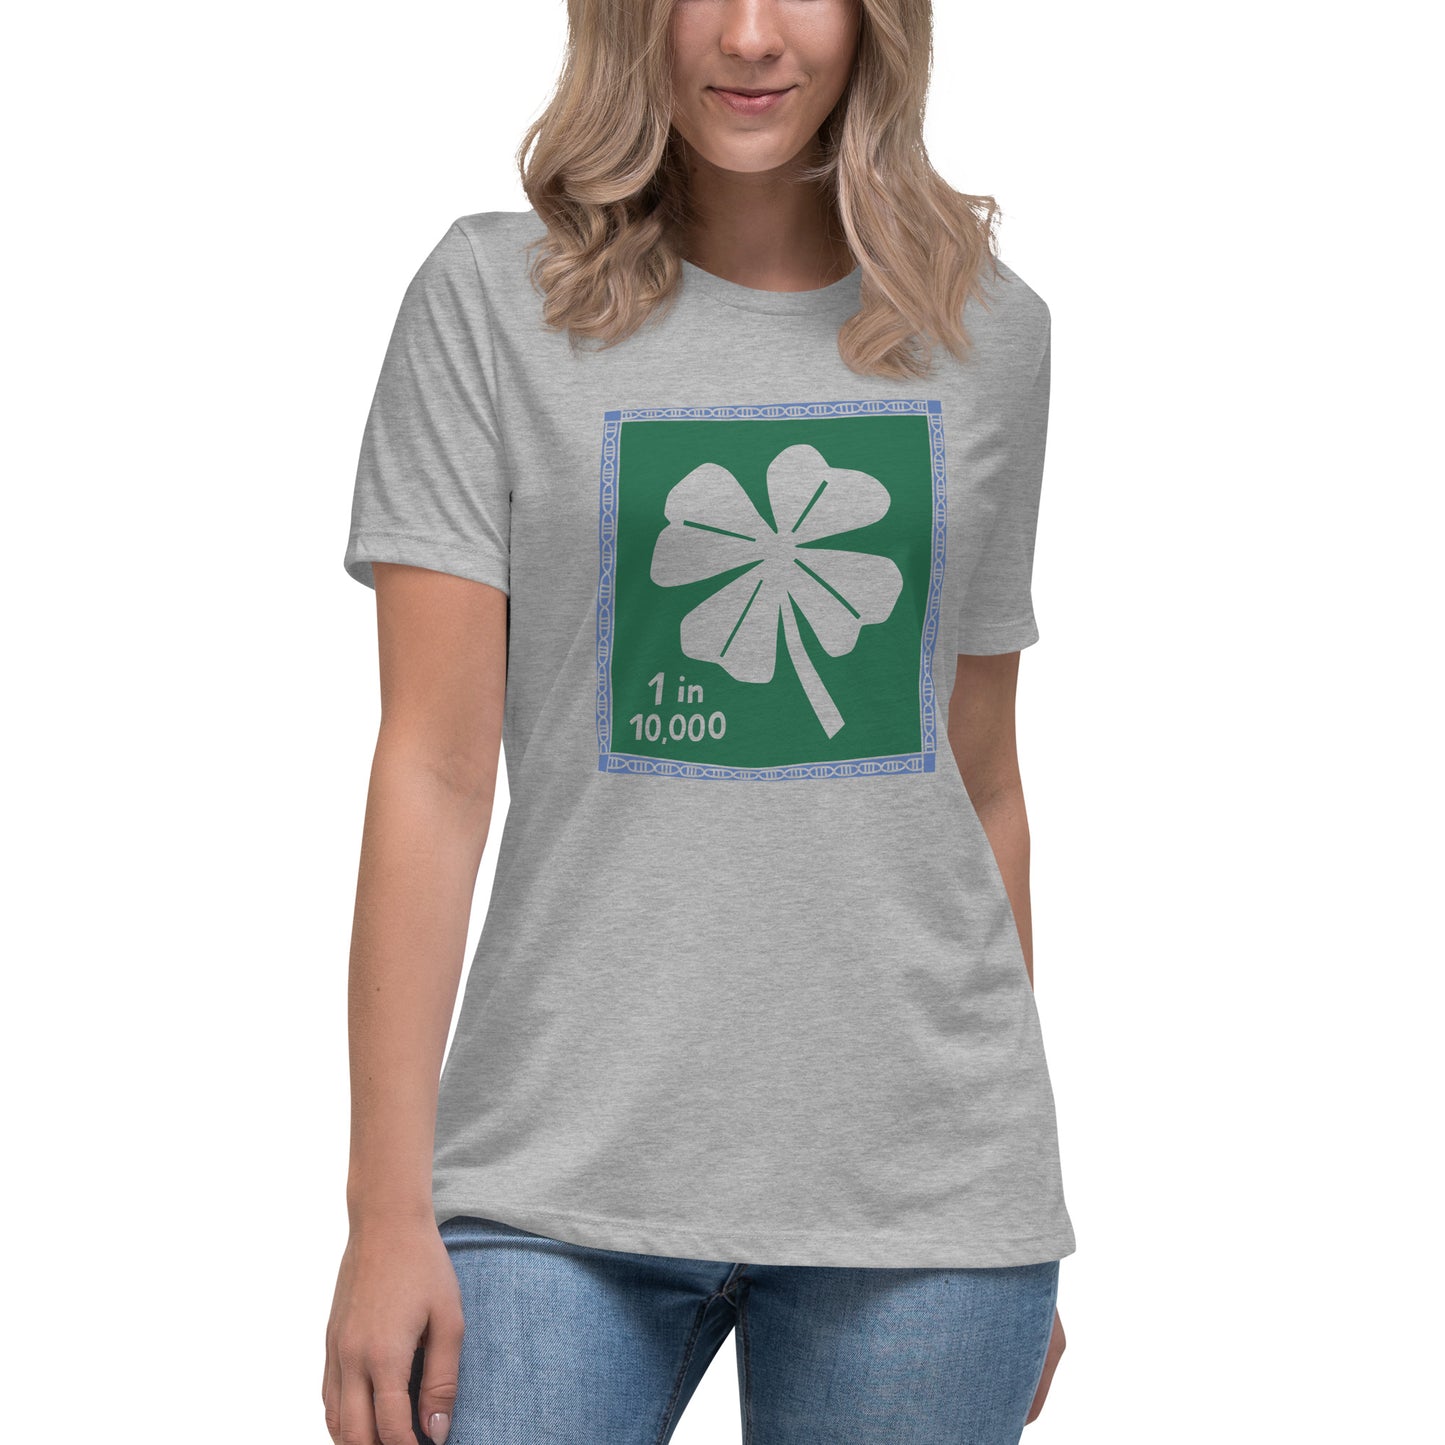 1 in 10,000 — Women's Relaxed Tee